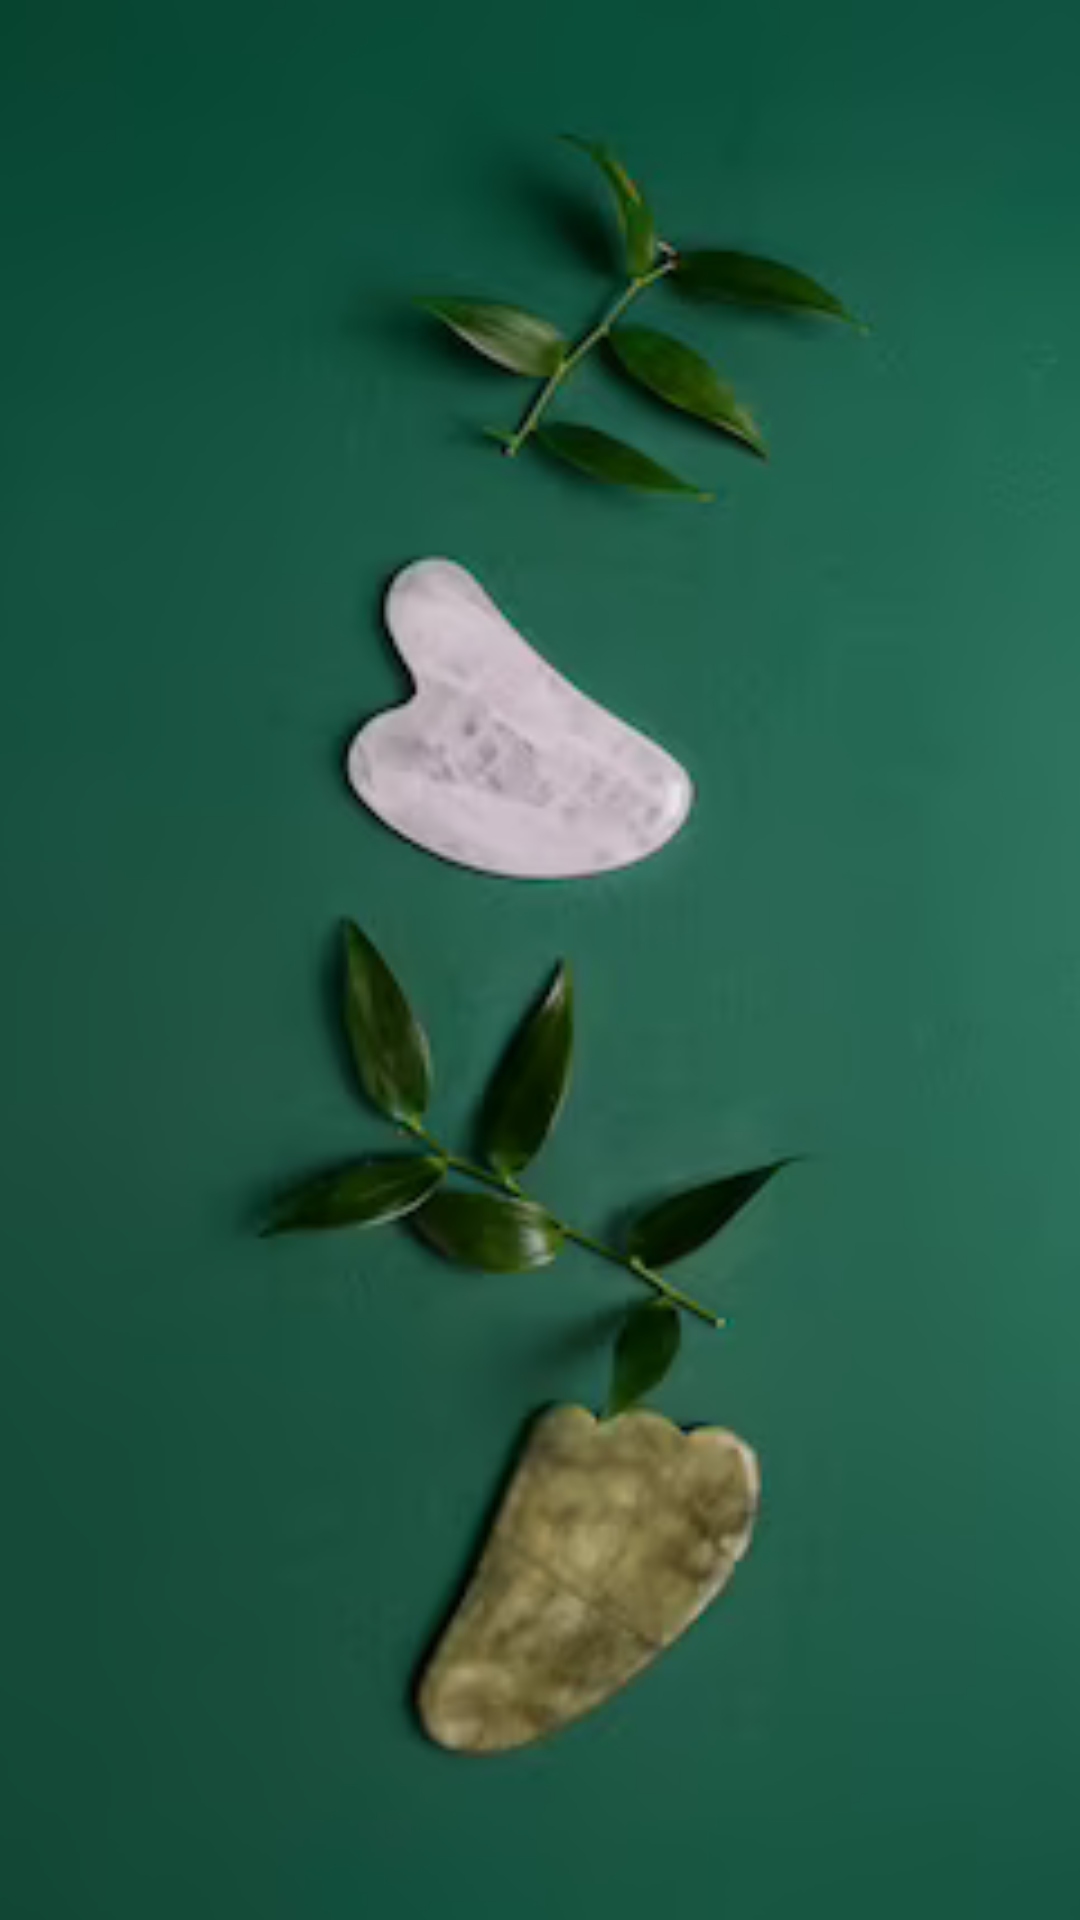 10 Benefits of Gua Sha for your face